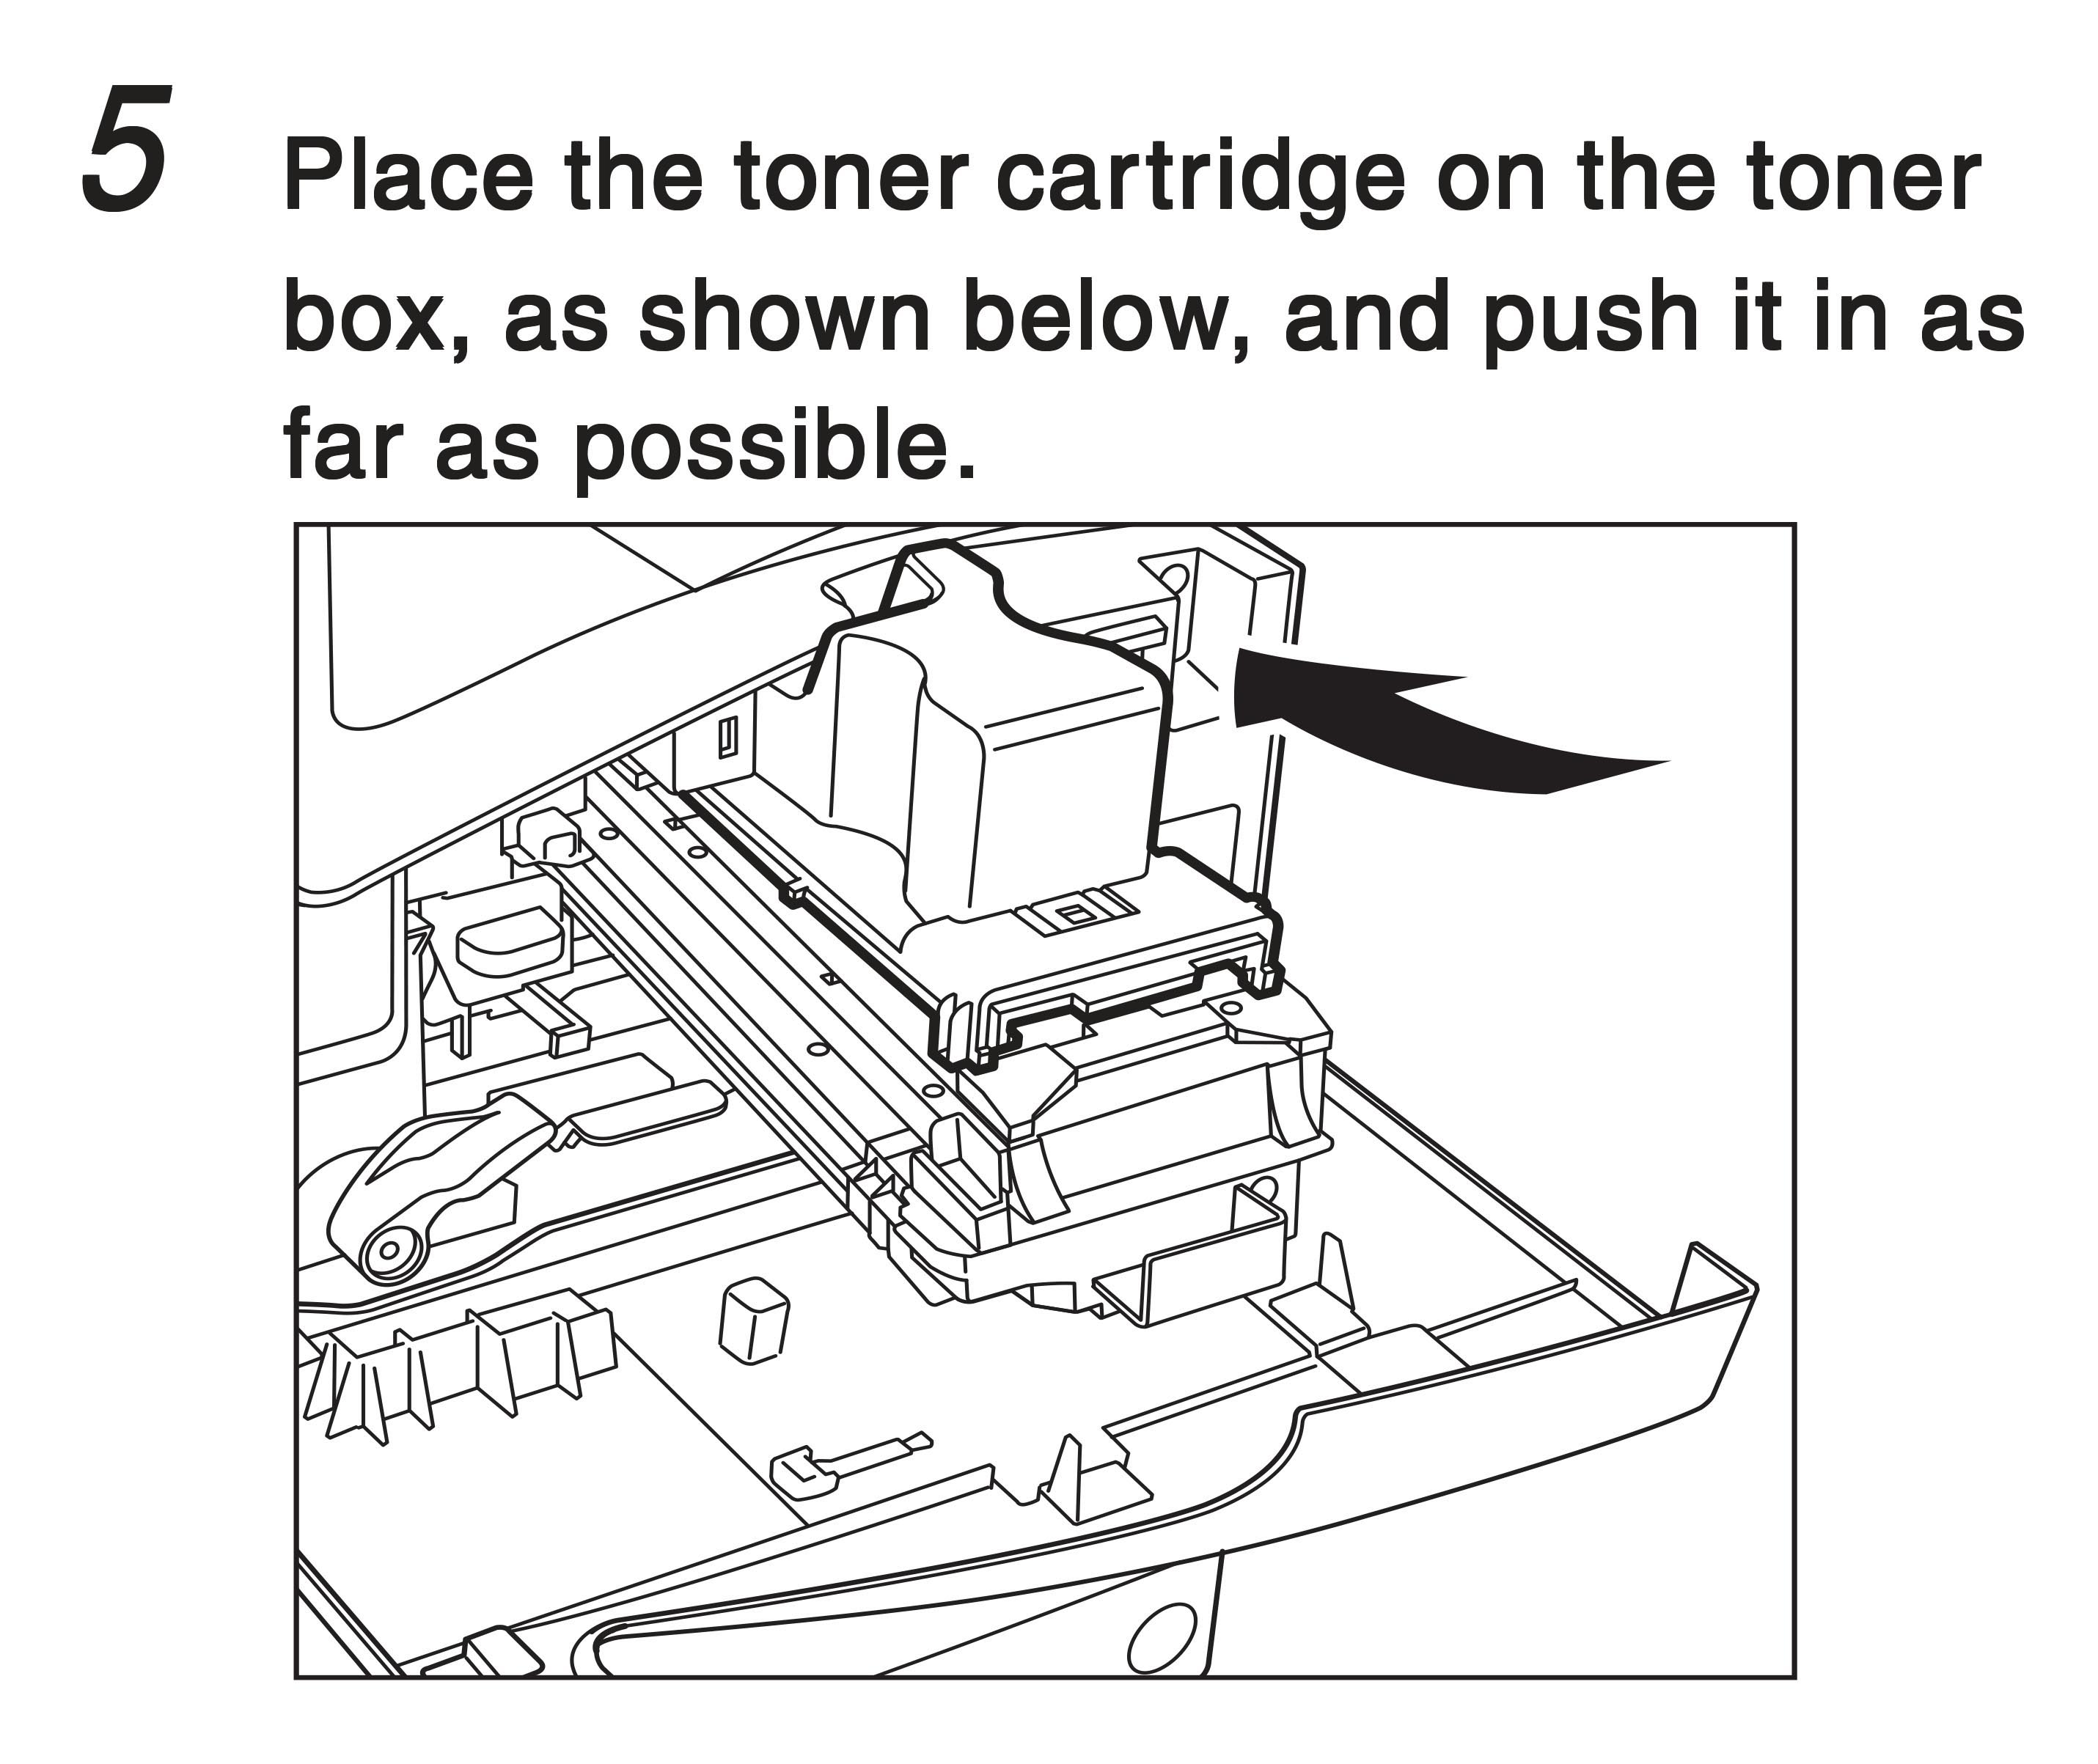 5. Place the toner cartridge on the toner box, as shown below, and push it in as far as possible.